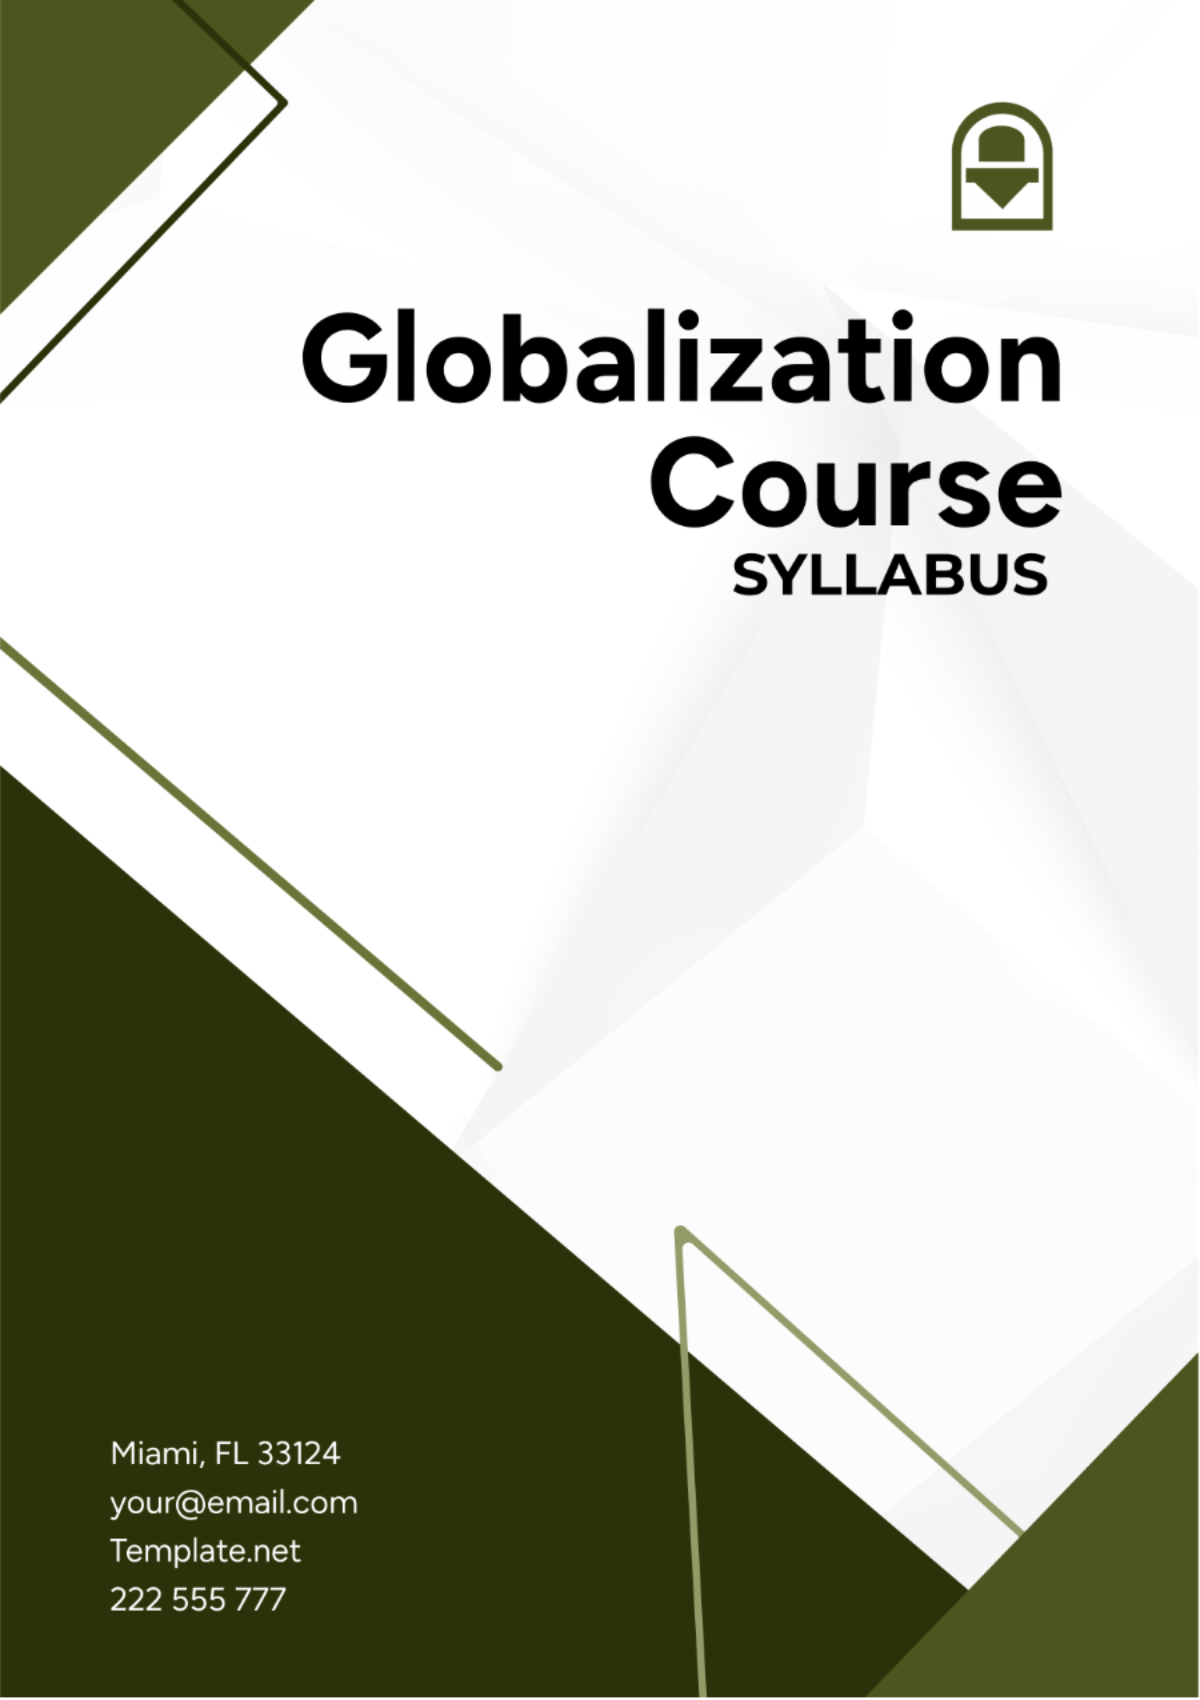 Free Globalization Course Syllabus Template